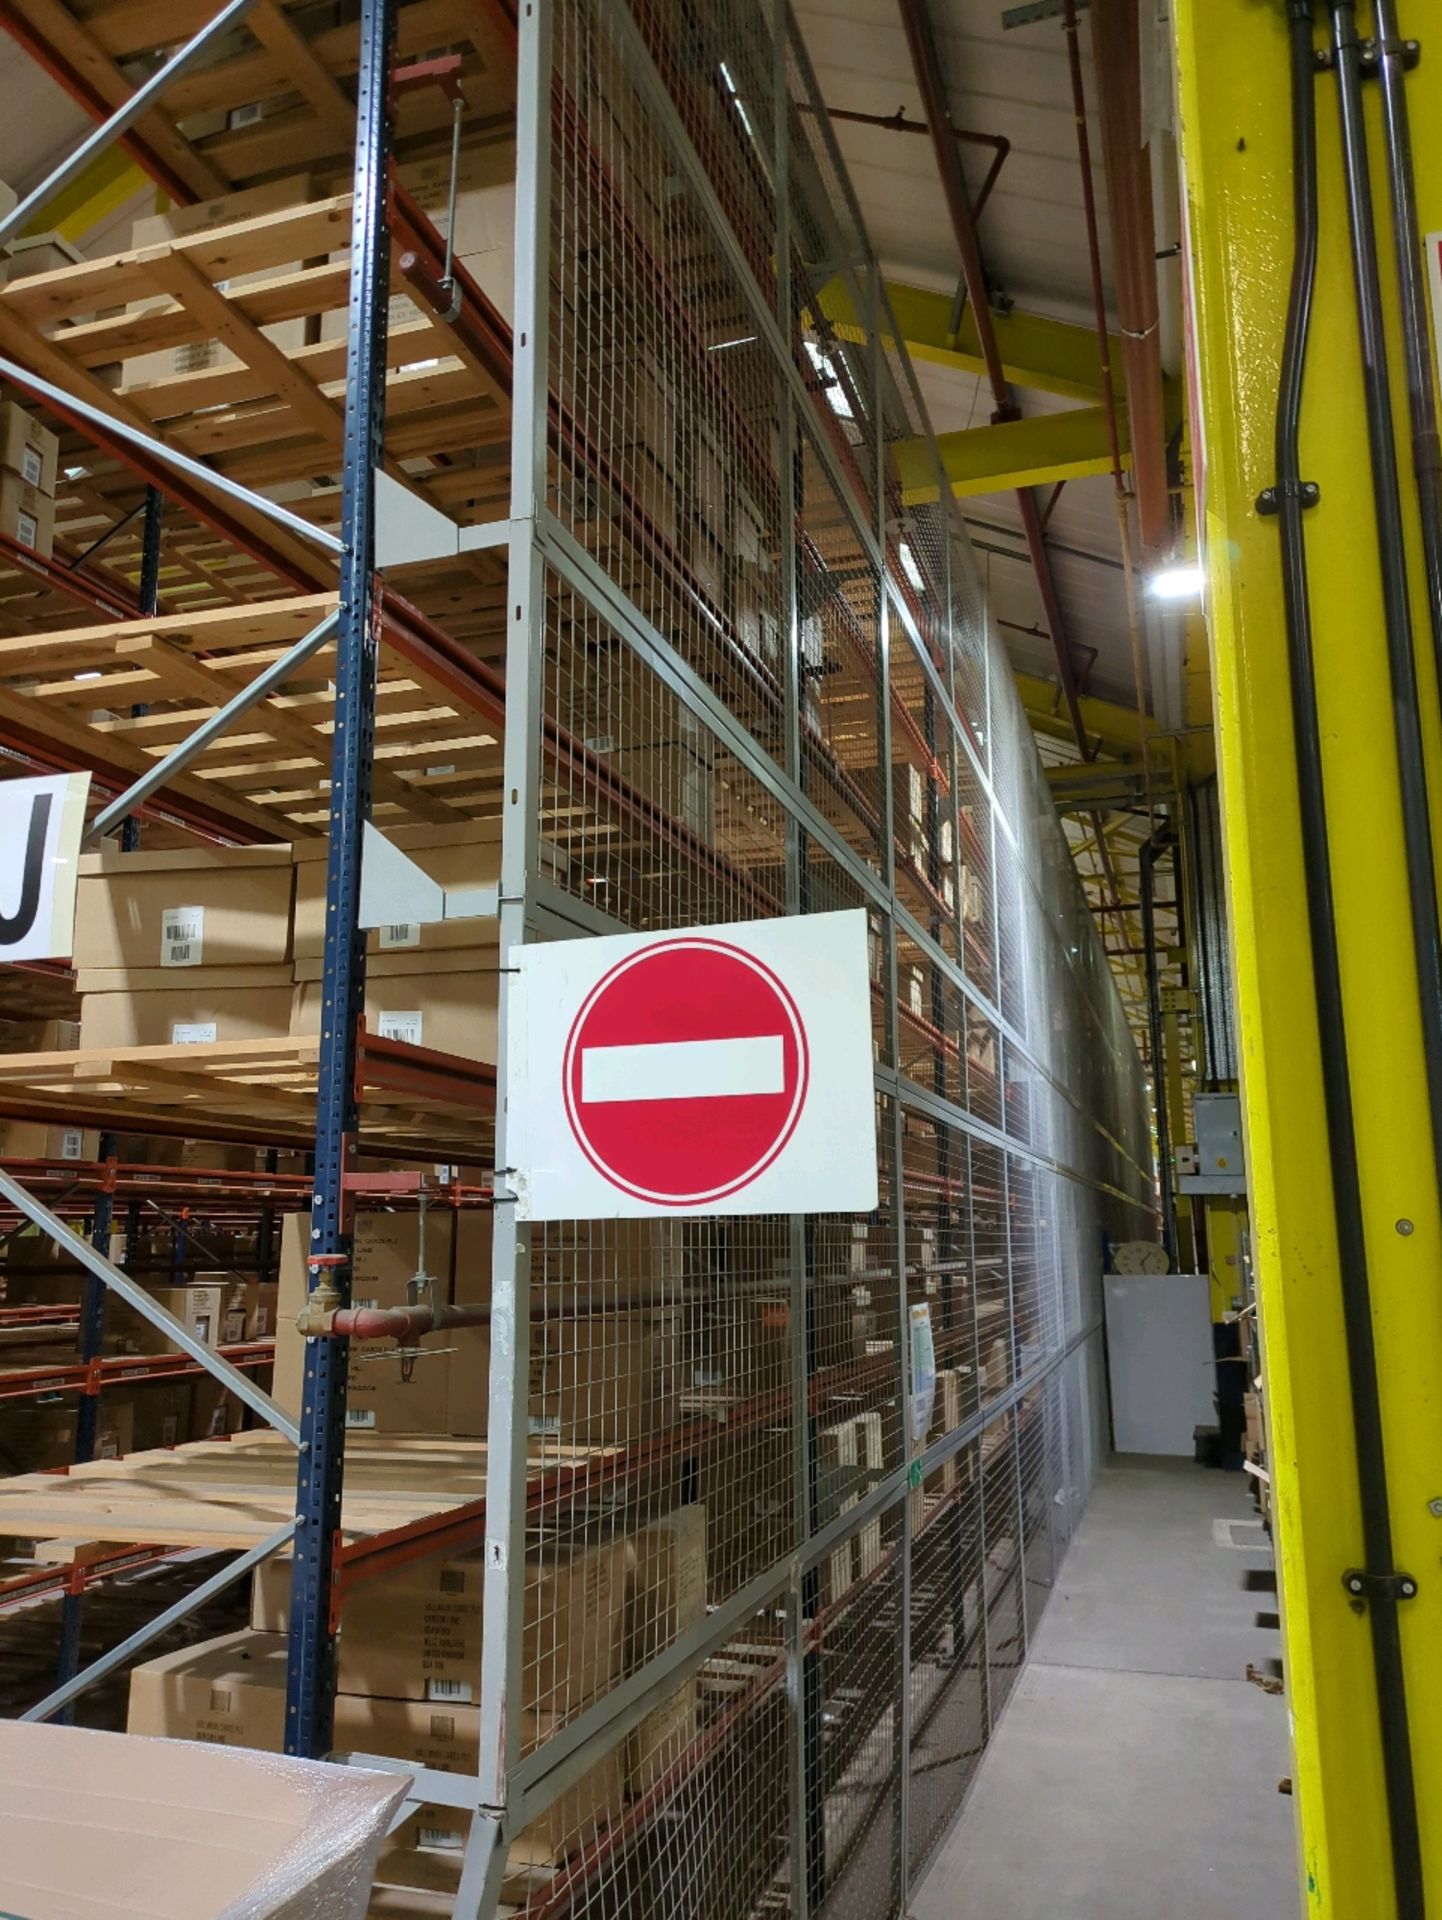 Run Of 13 Bays Of Boltless Industrial Pallet Racking - Image 8 of 11